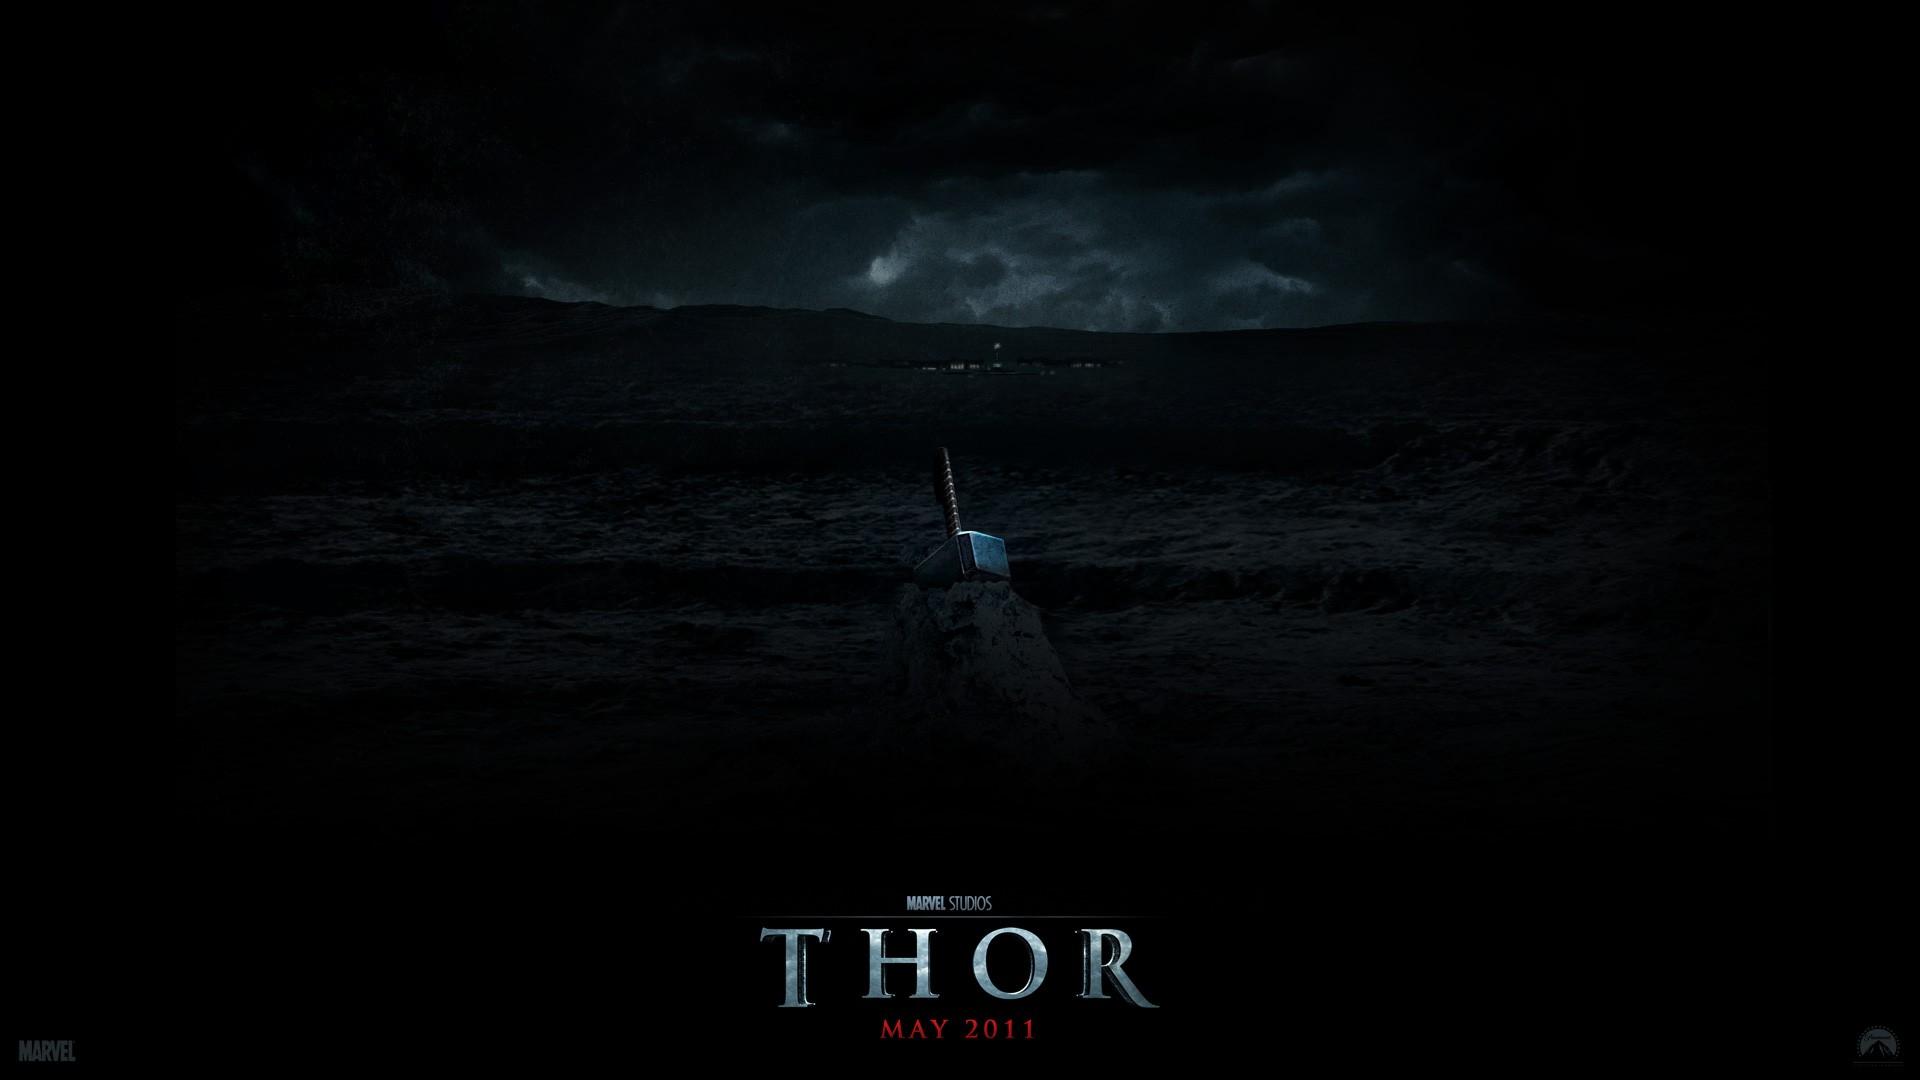 Download the Thors Hammer Wallpaper, Thors Hammer iPhone Wallpaper